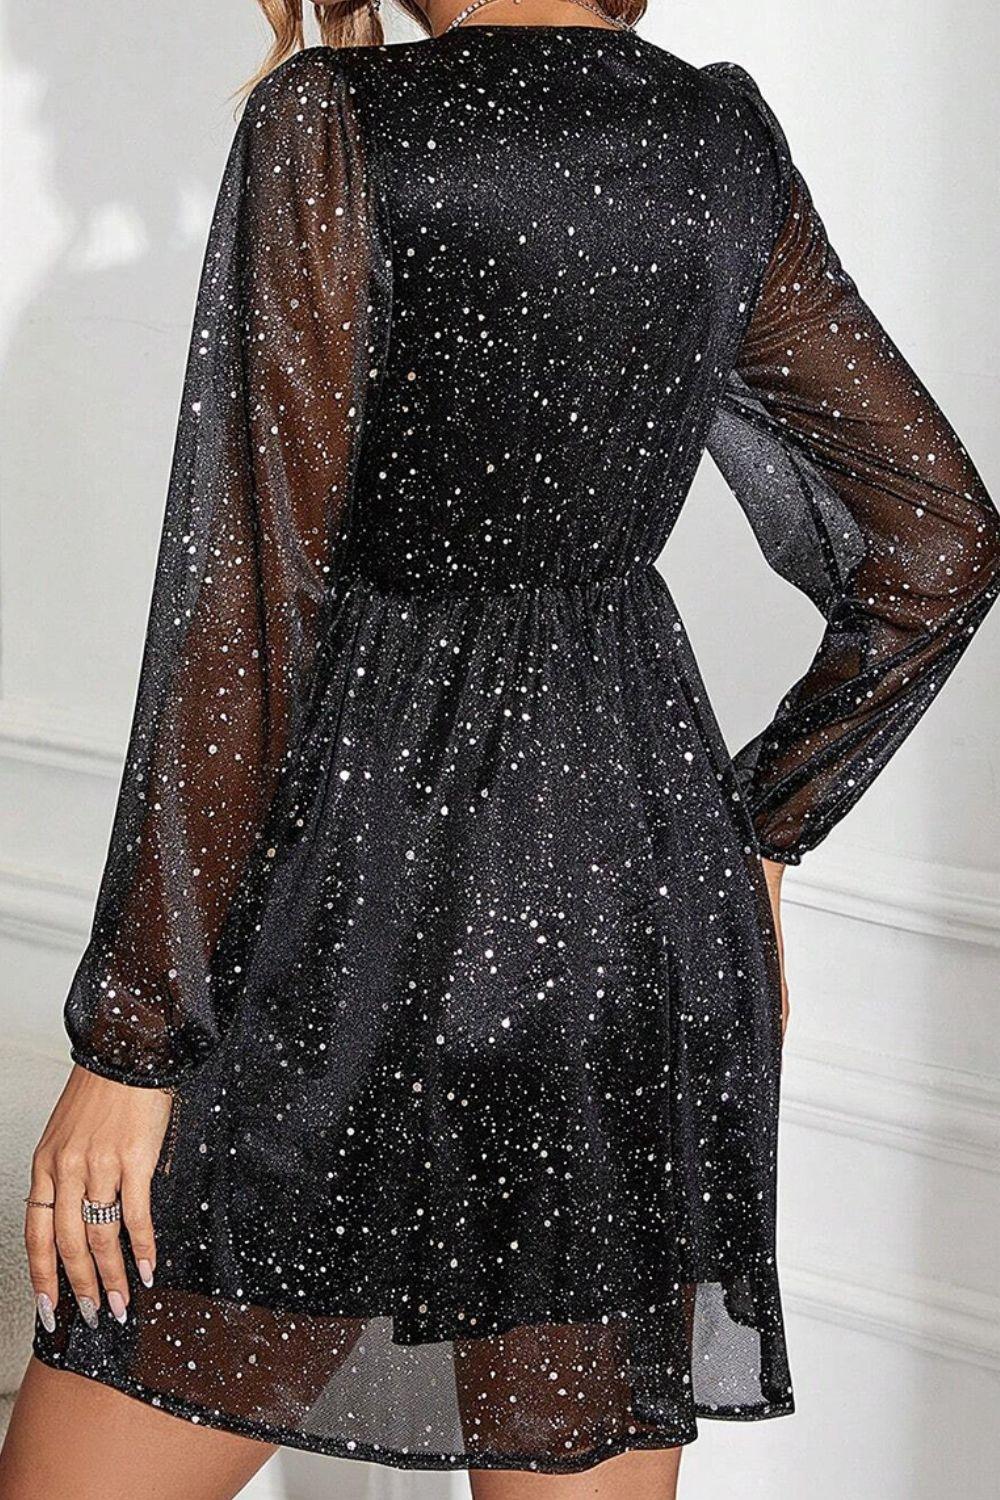 a woman wearing a black dress with stars on it